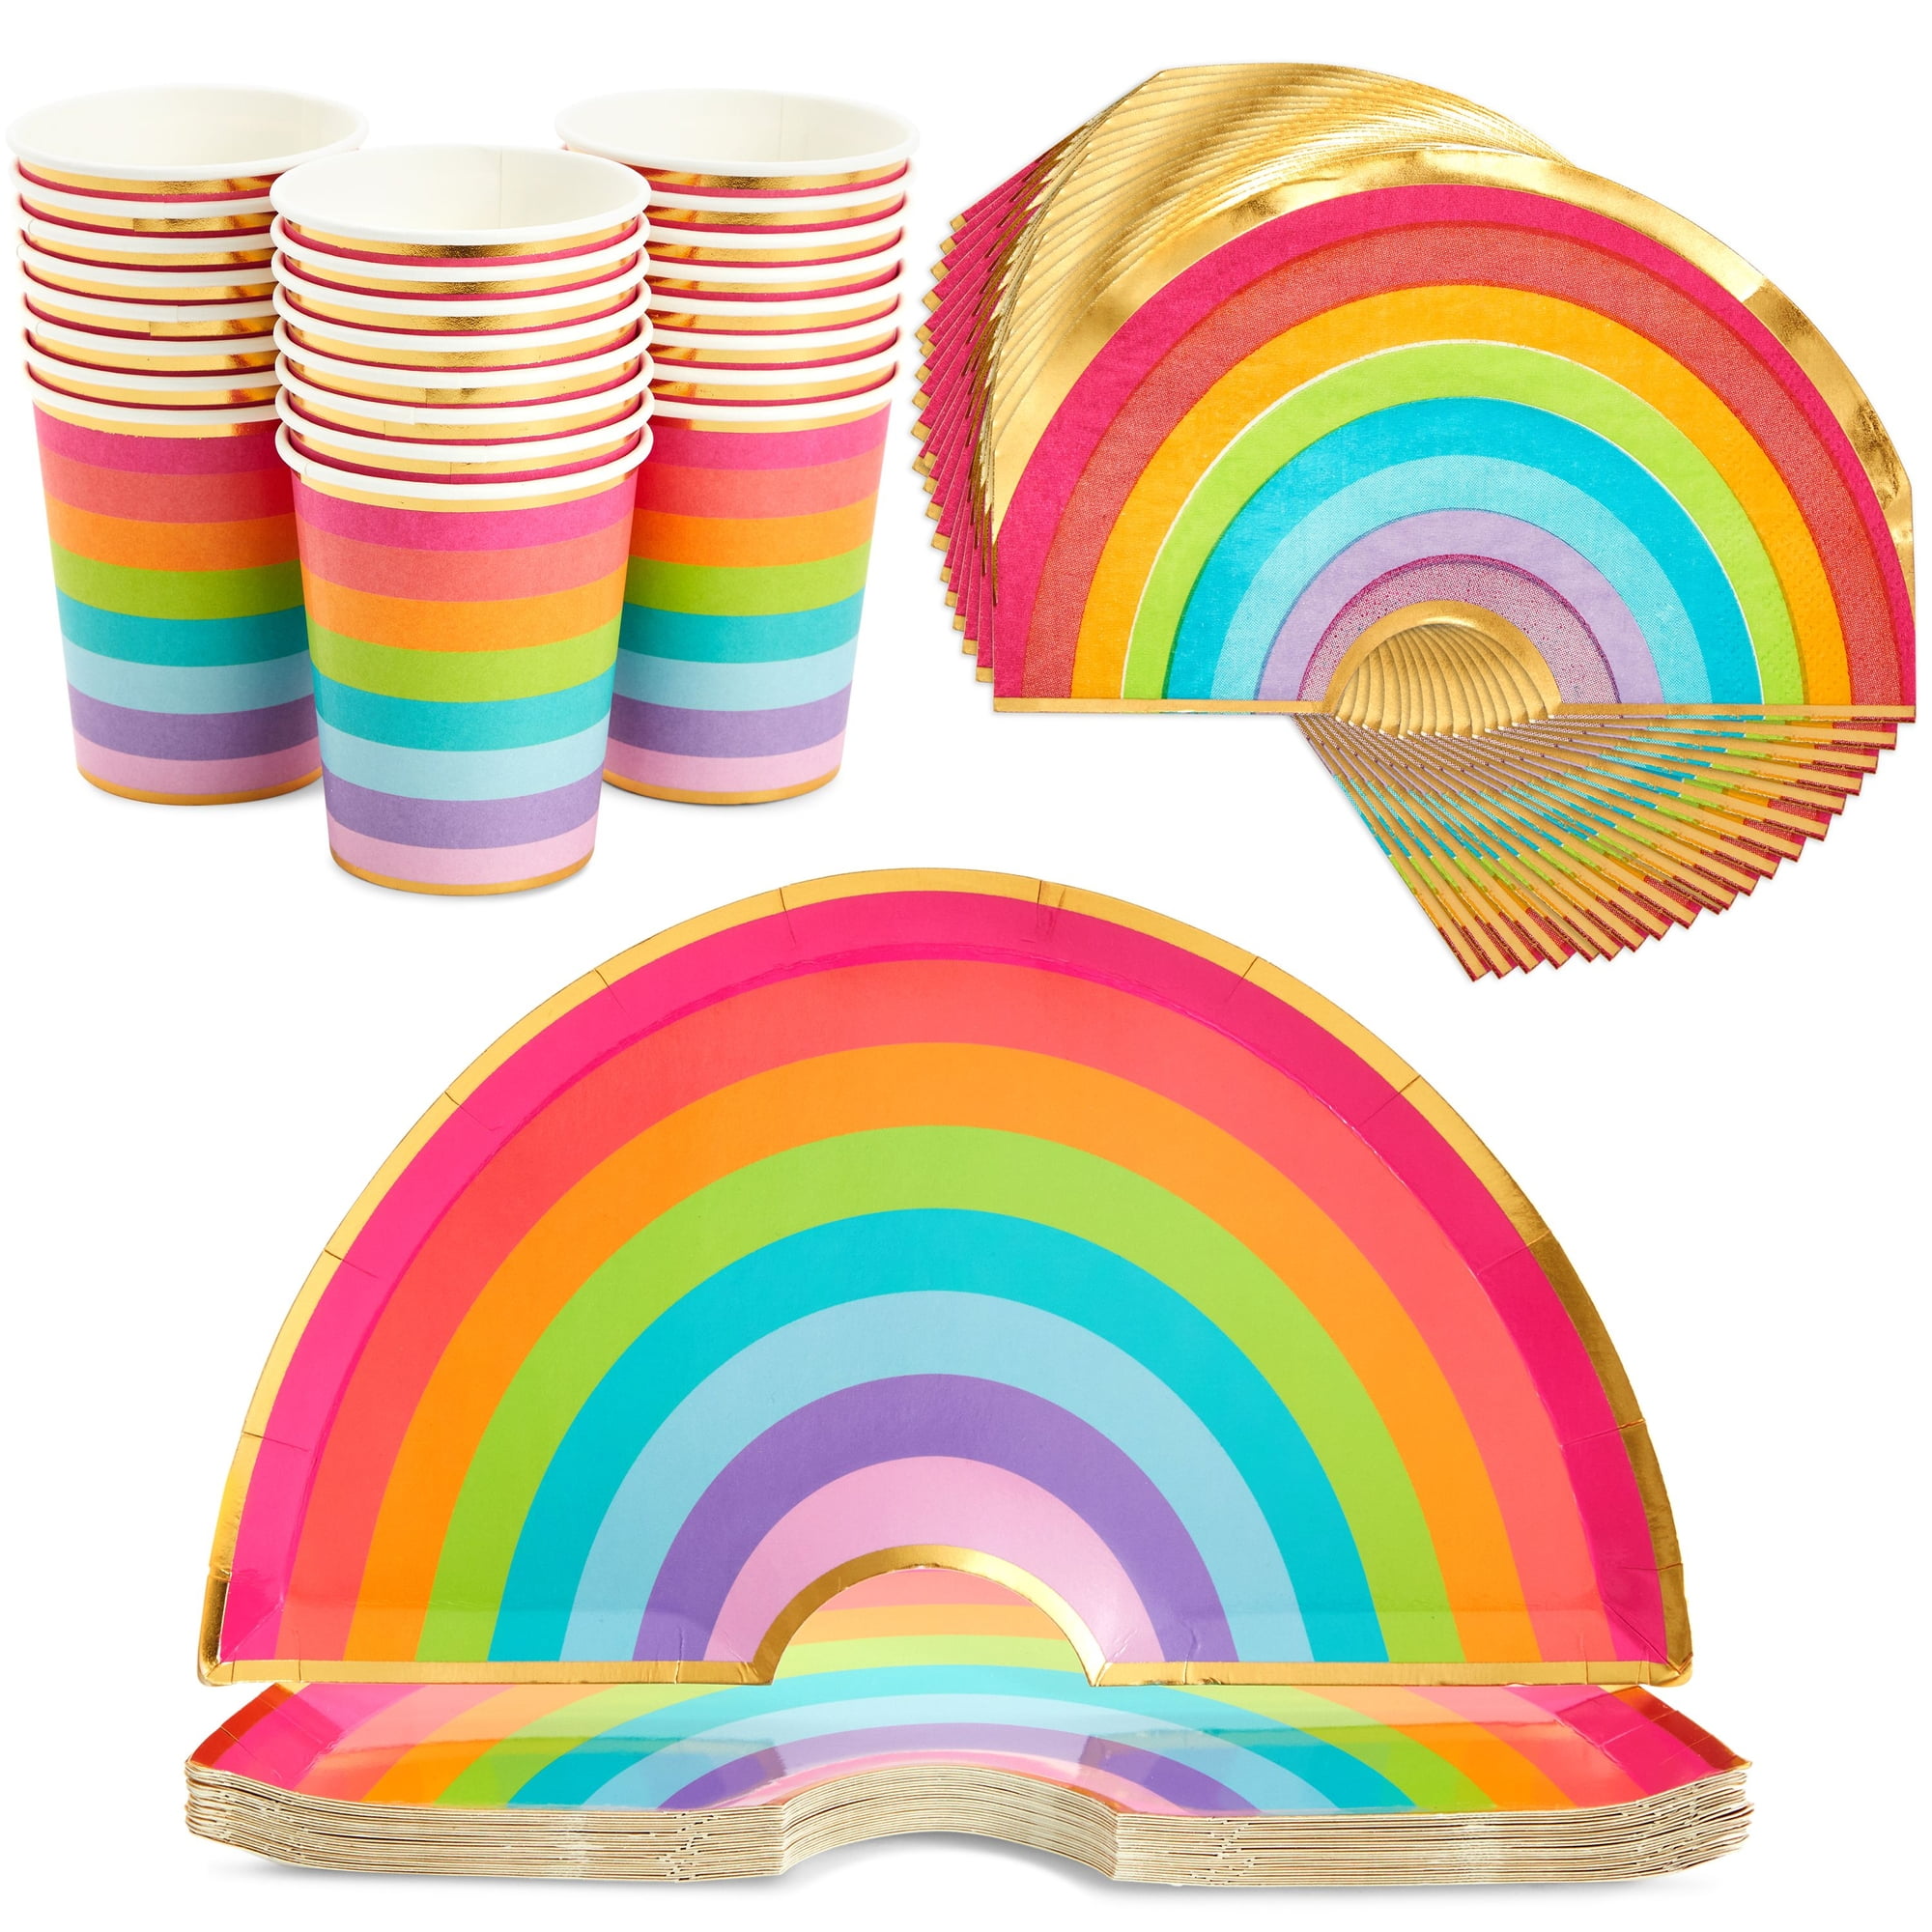 DIY custom party plates and napkins #party #decorations #papercraft 